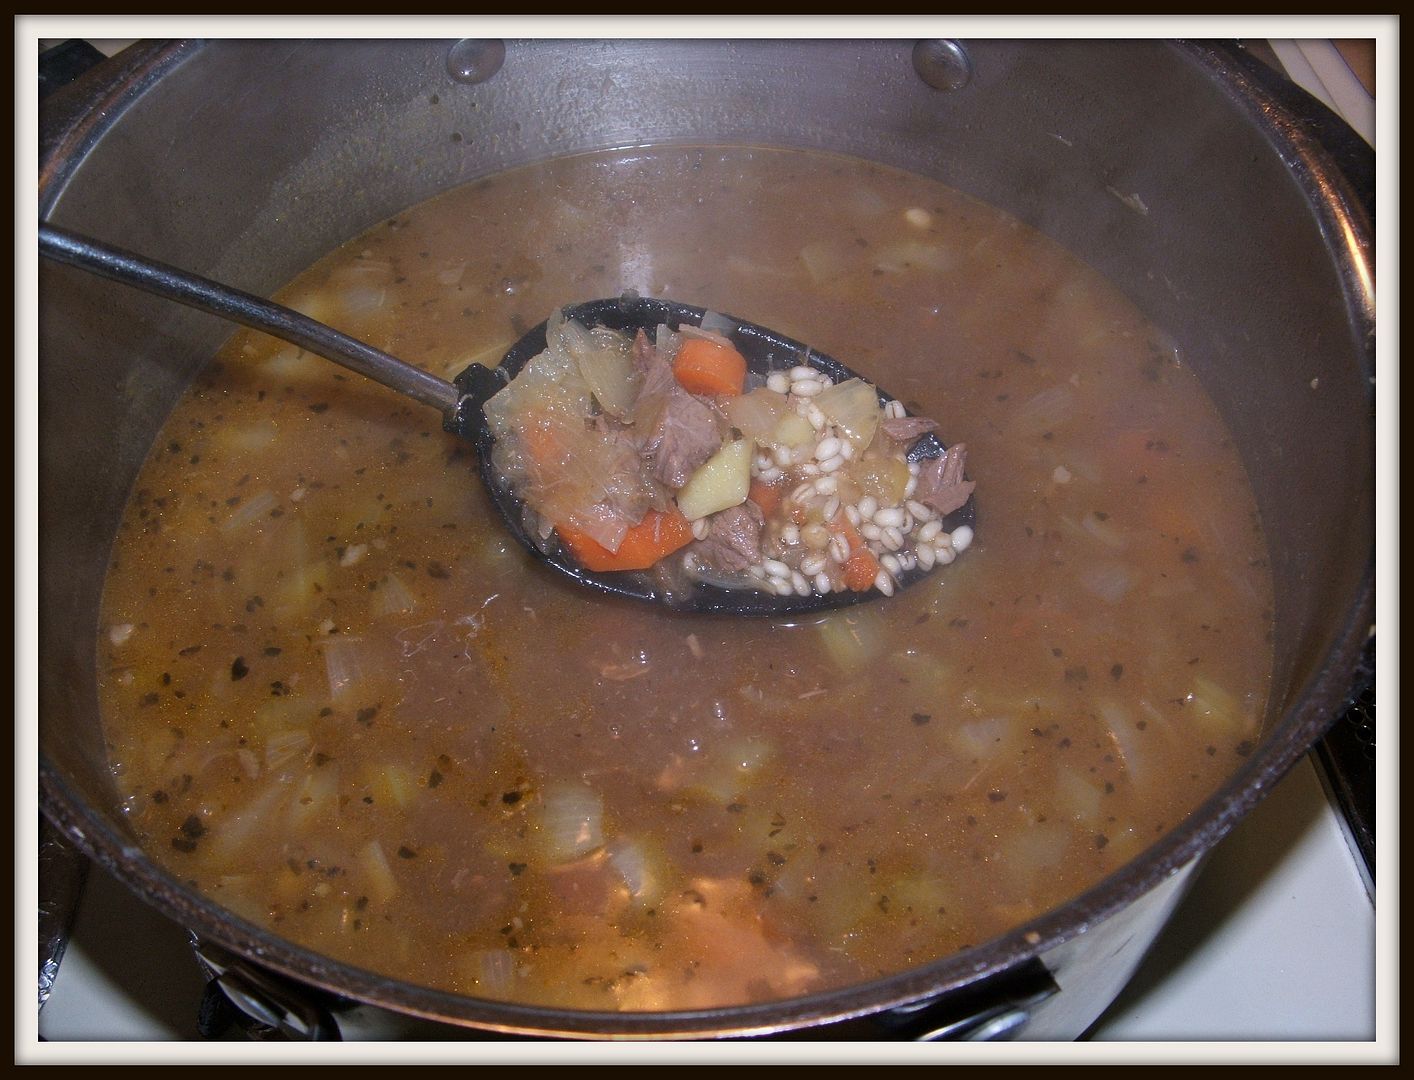 Beef Barley Soup by Angie Ouellette-Tower for godsgrowinggarden.com photo 014_zpse8afb3c4.jpg